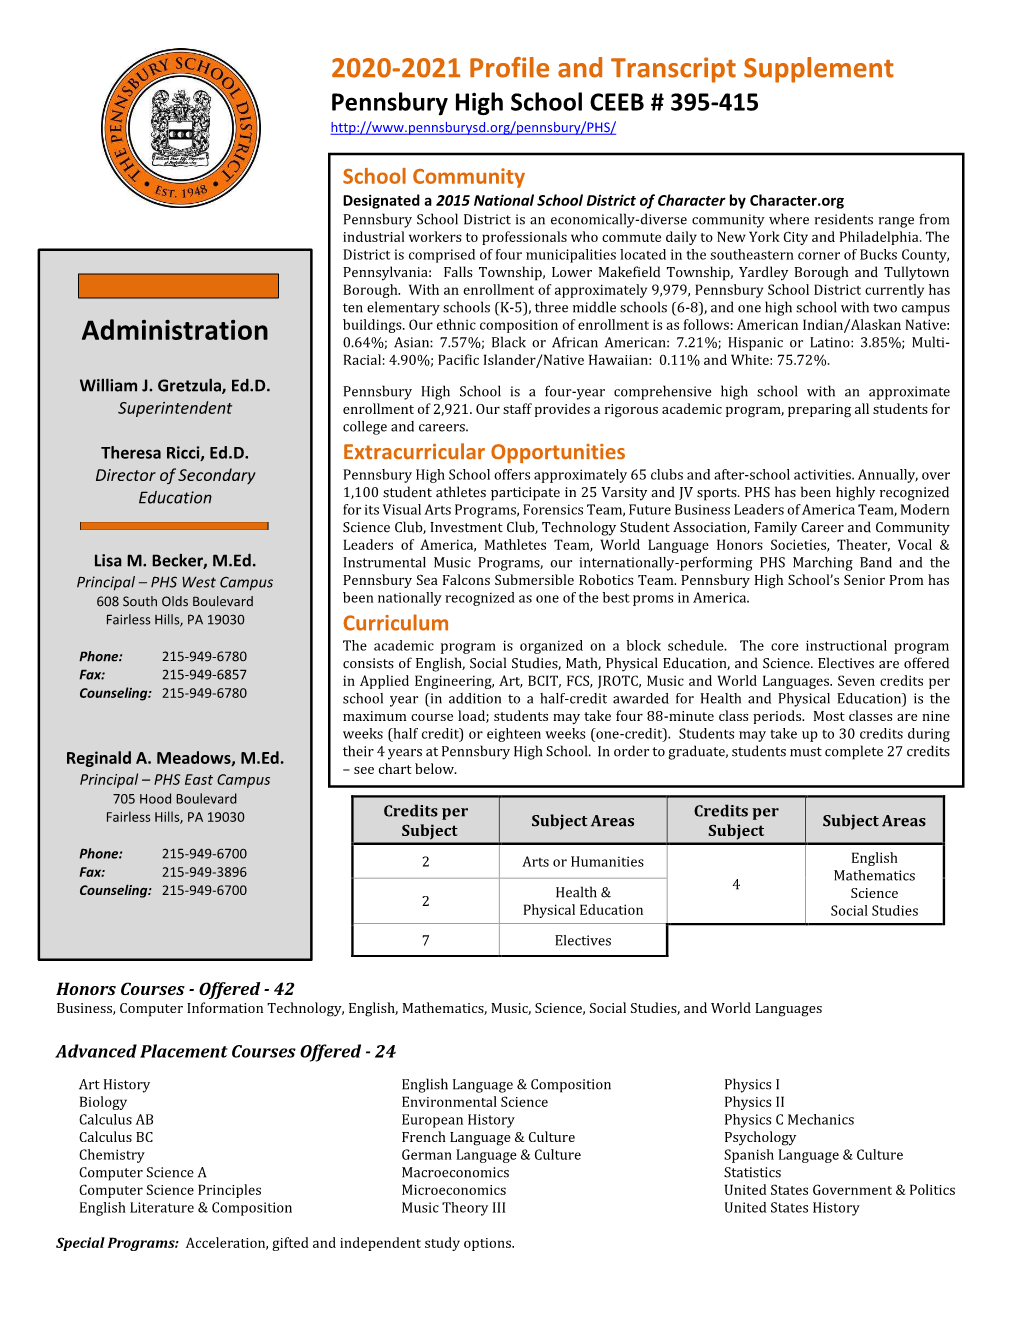 Pennsbury Profile and Transcript Supplement 2020-2021